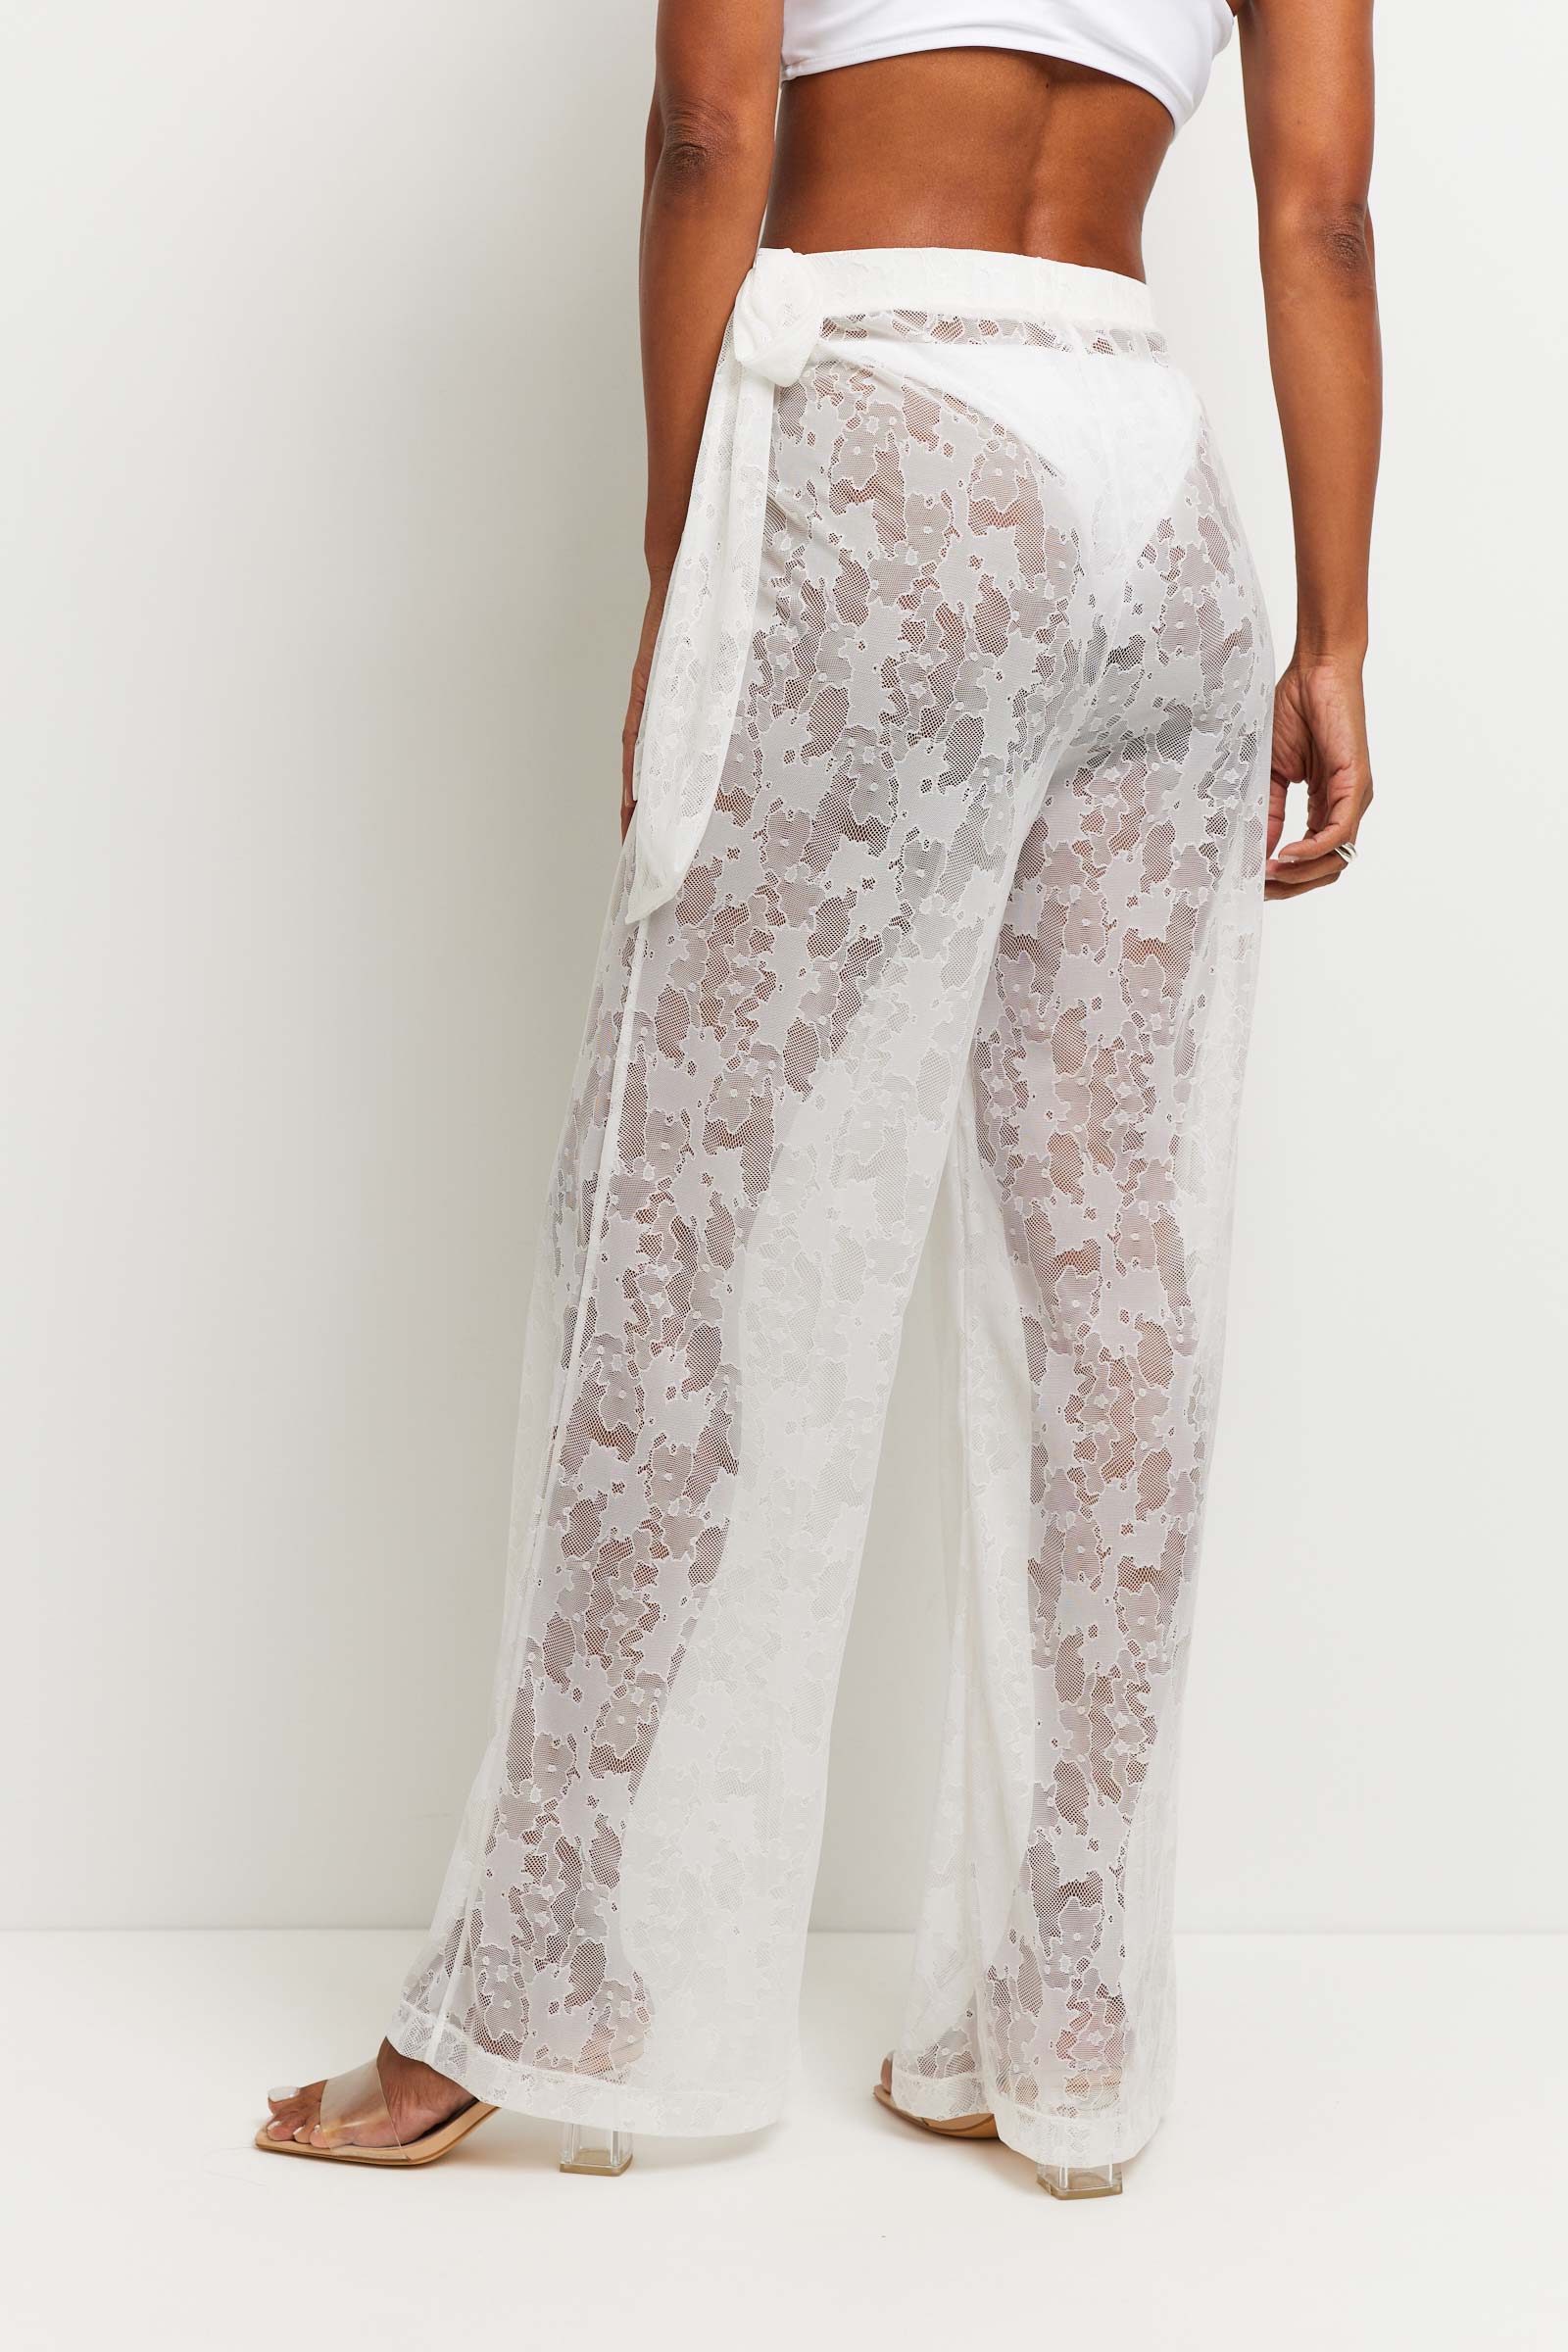 The Best Travel Pants. Woman Showing the Back Profile of a Moana Camo Mesh Pant in White.